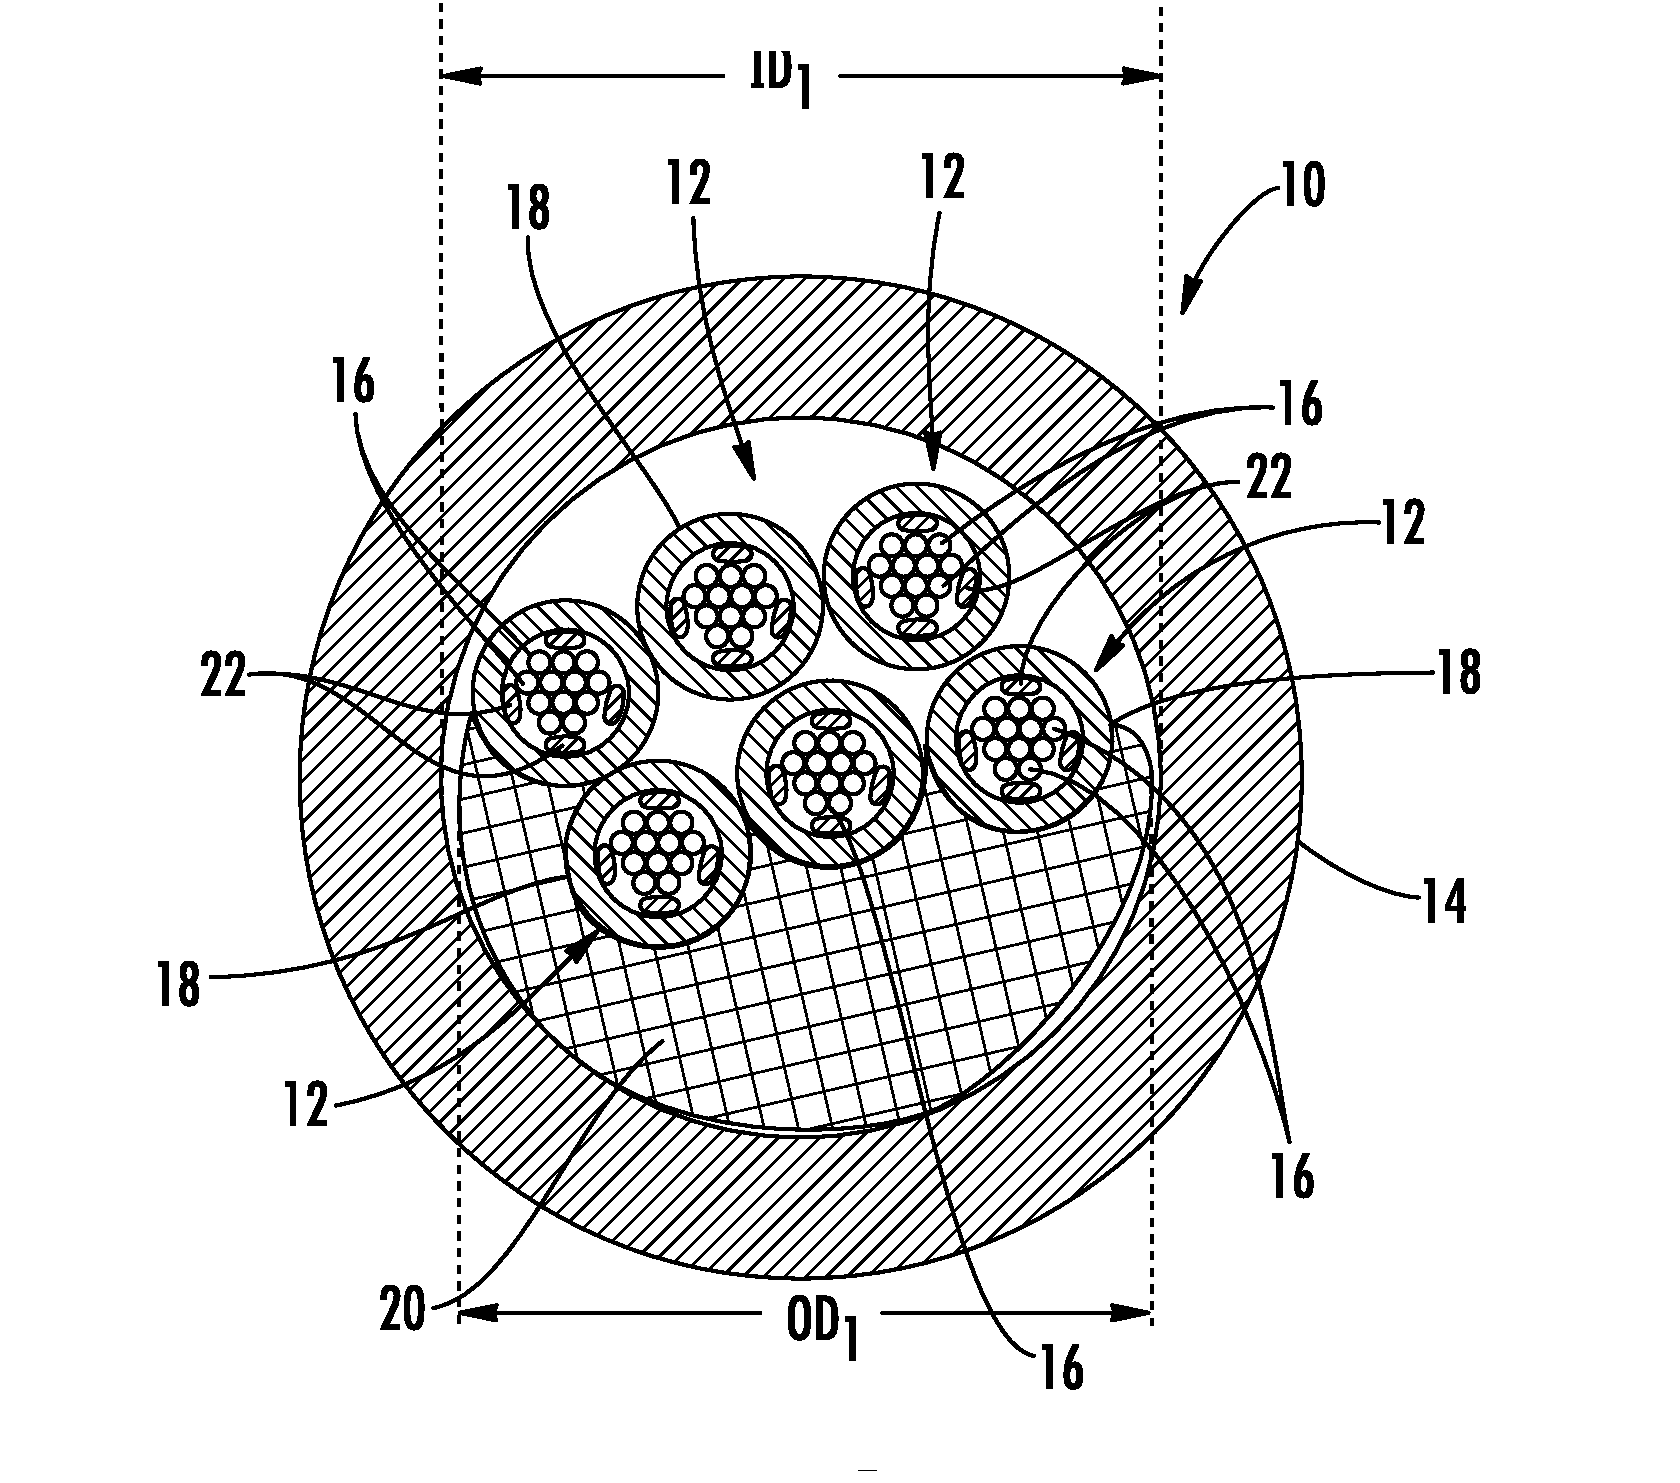 Multi-fiber, fiber optic cable assemblies providing constrained optical fibers within an optical fiber sub-unit, and related fiber optic components, cables, and methods